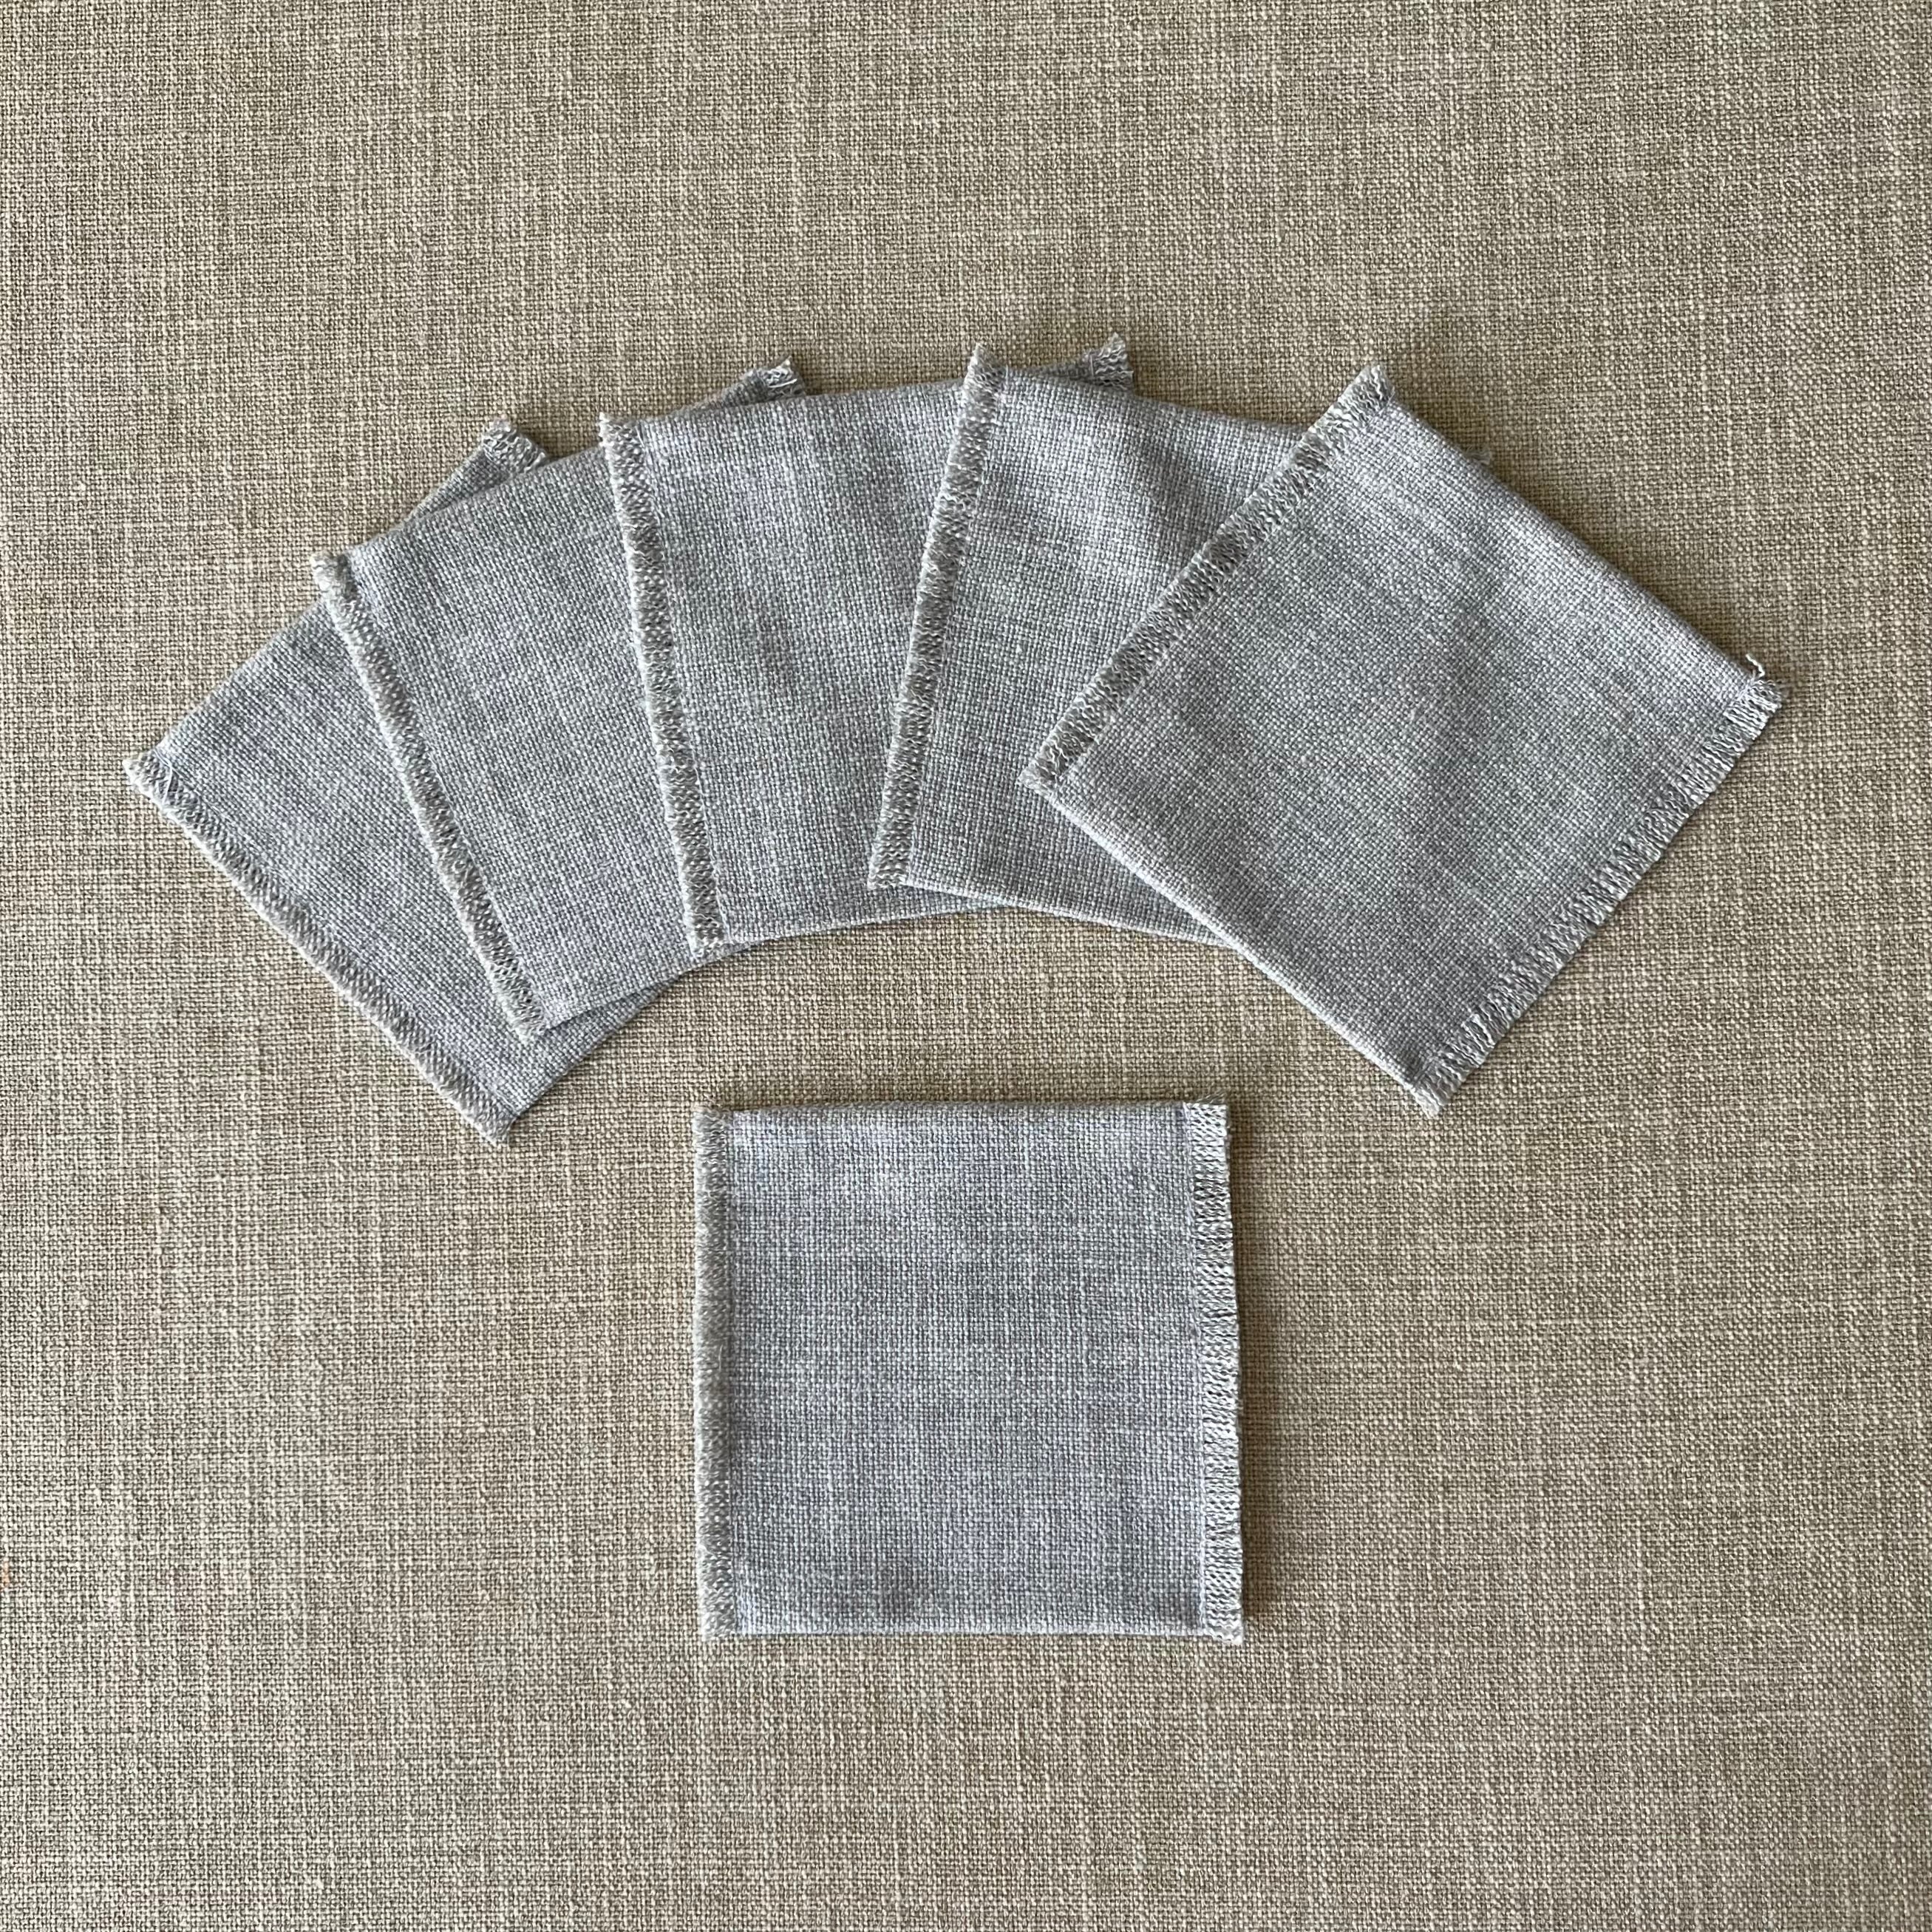 Nomad Heathered Cocktail Coasters - 5 colours